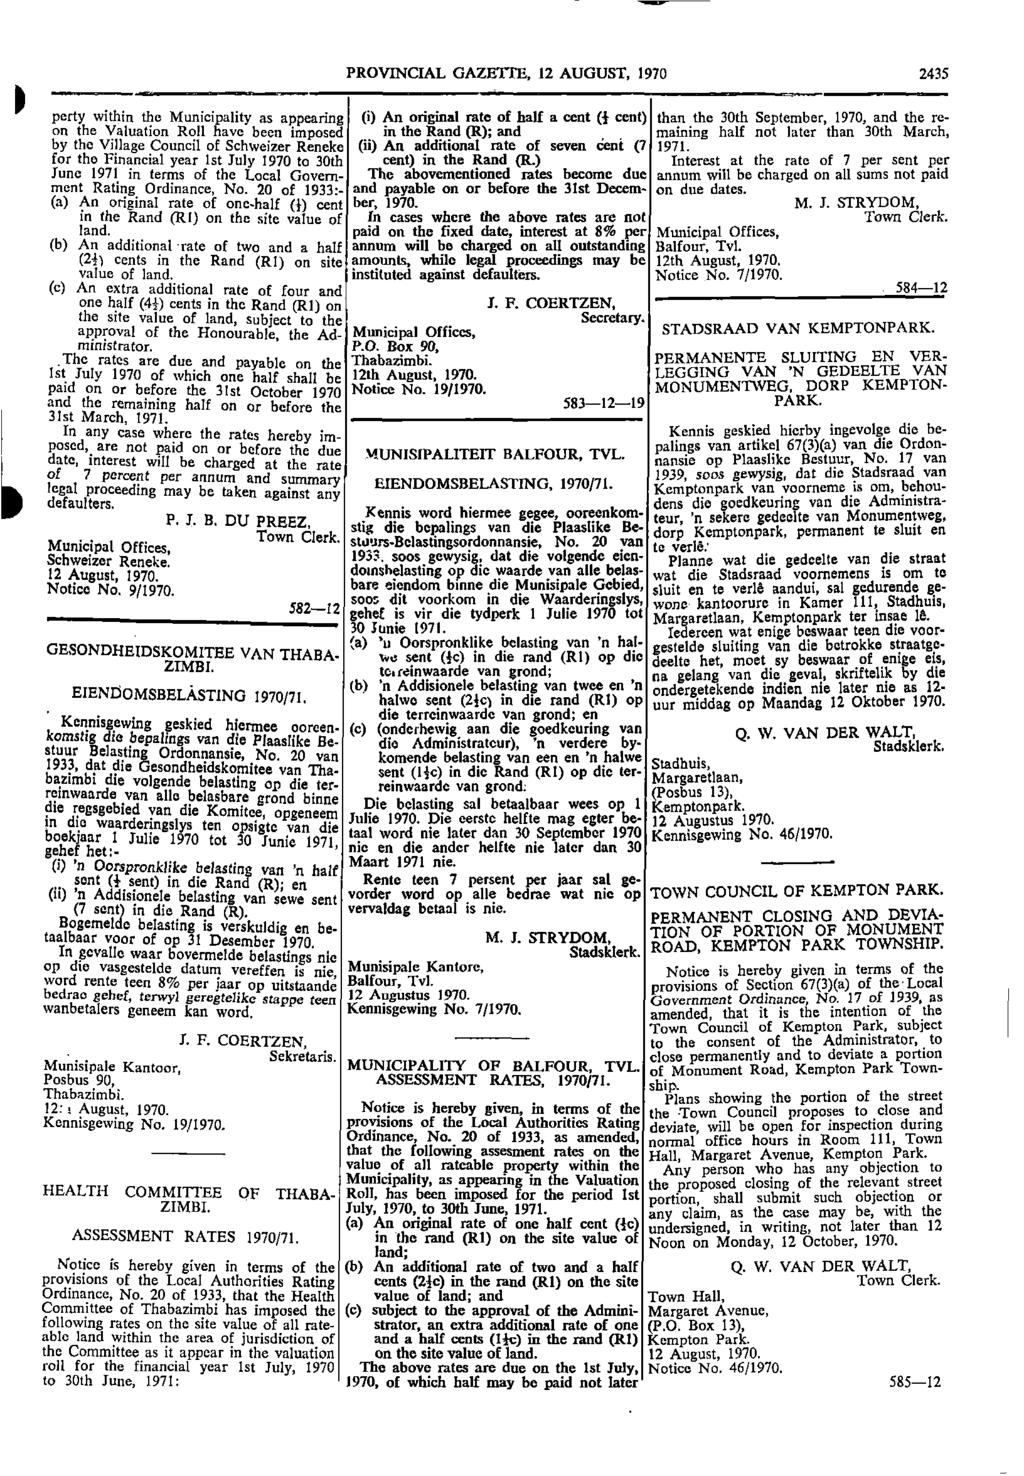 PROVINCIAL GAZETTE, GAZETTE, 12 AUGUST, 1970 2435 0 perty within the Municipality as appearing (i) All original rate of half a cent (3 cent) than the 30th September, 1970, and the reon the Valuation